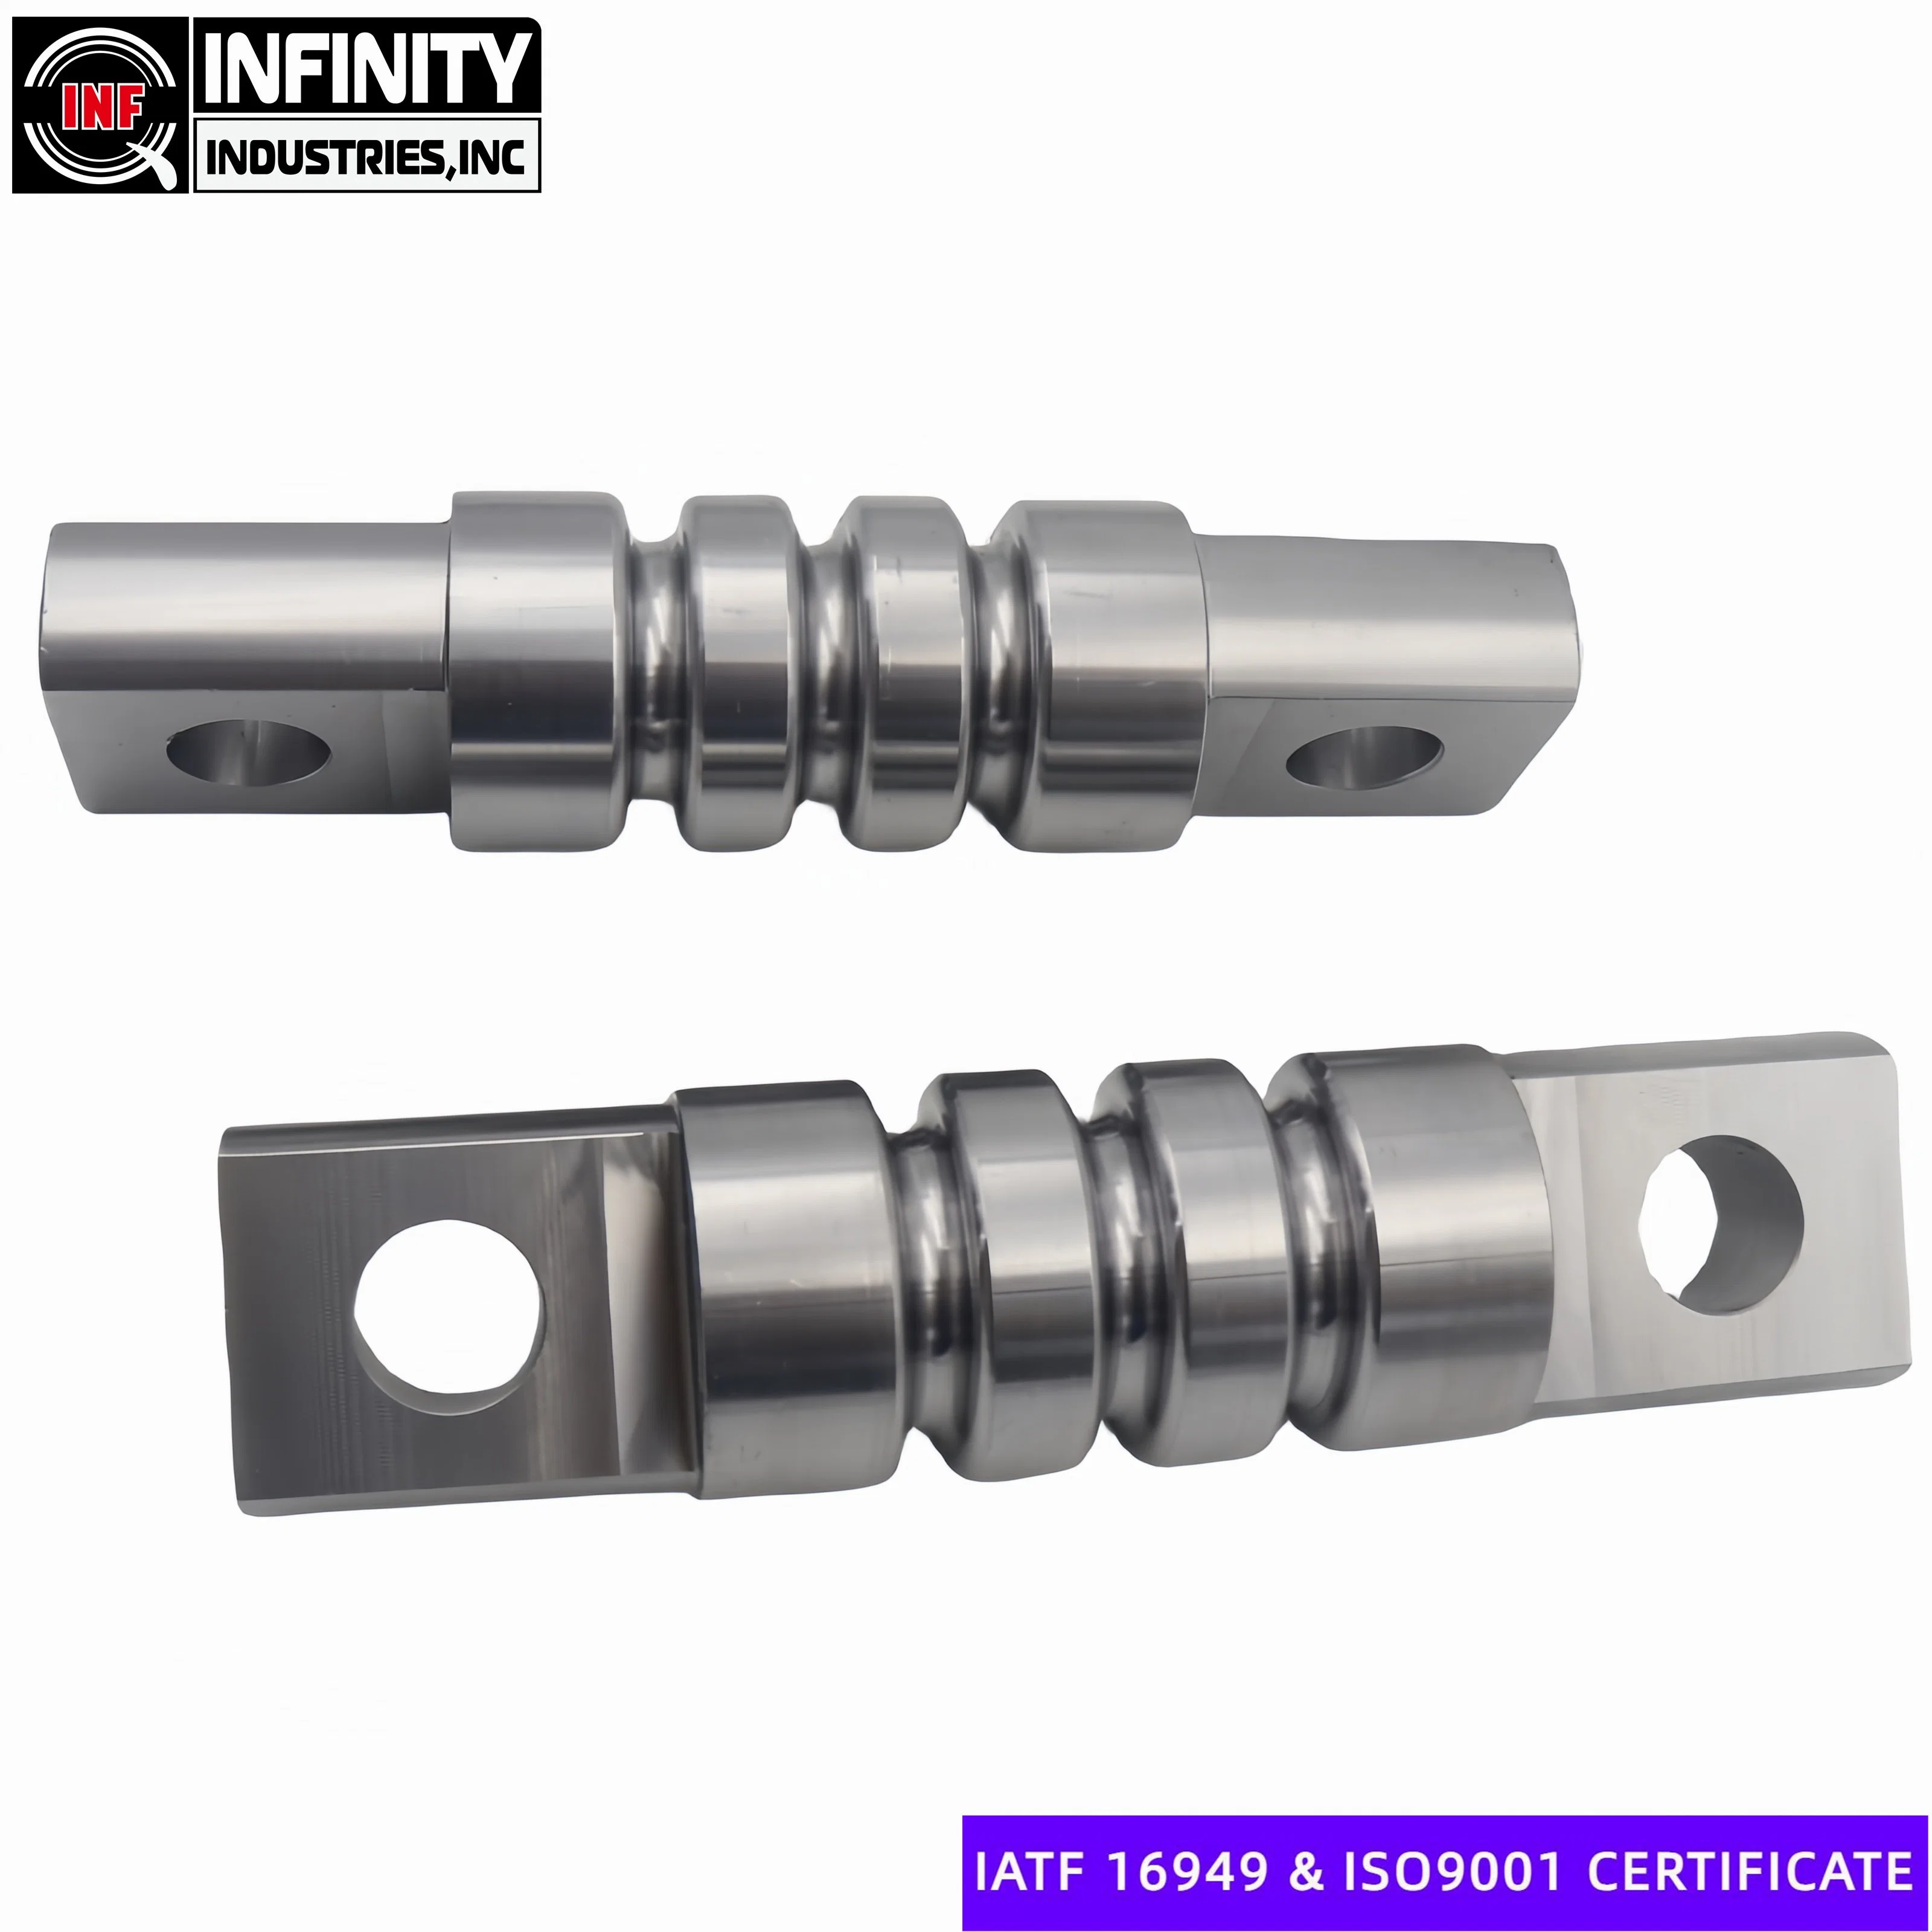 Steel Heavy Auto Spare Part/Truck Part/Suspension Part by CNC Machining with IATF16949 Certificate